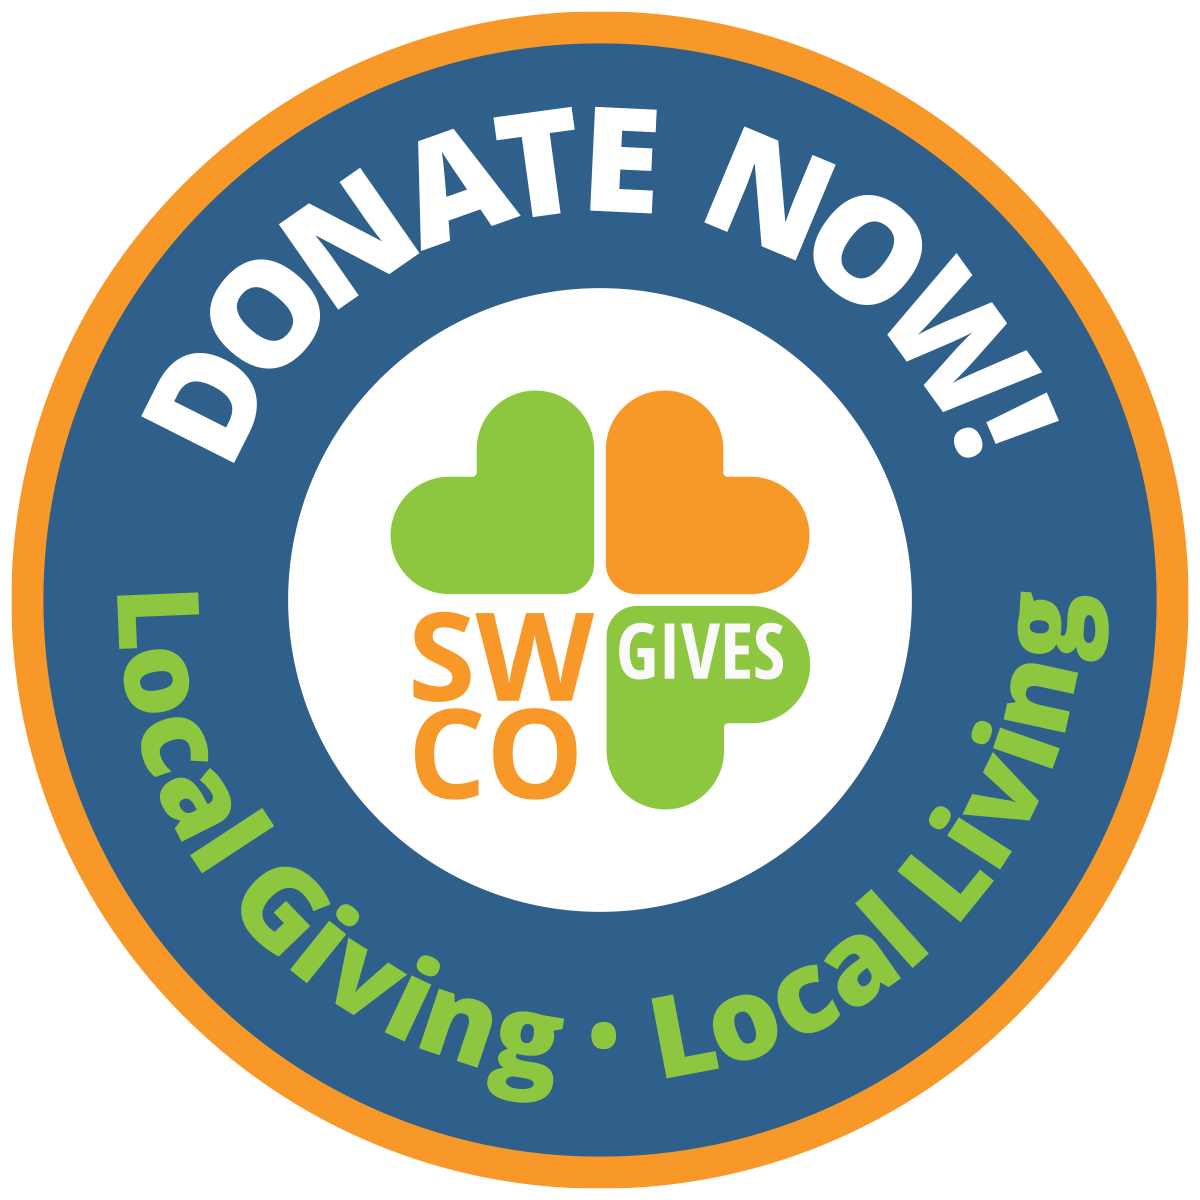 SWCOGives.org – Schedule your donation starting November 1st